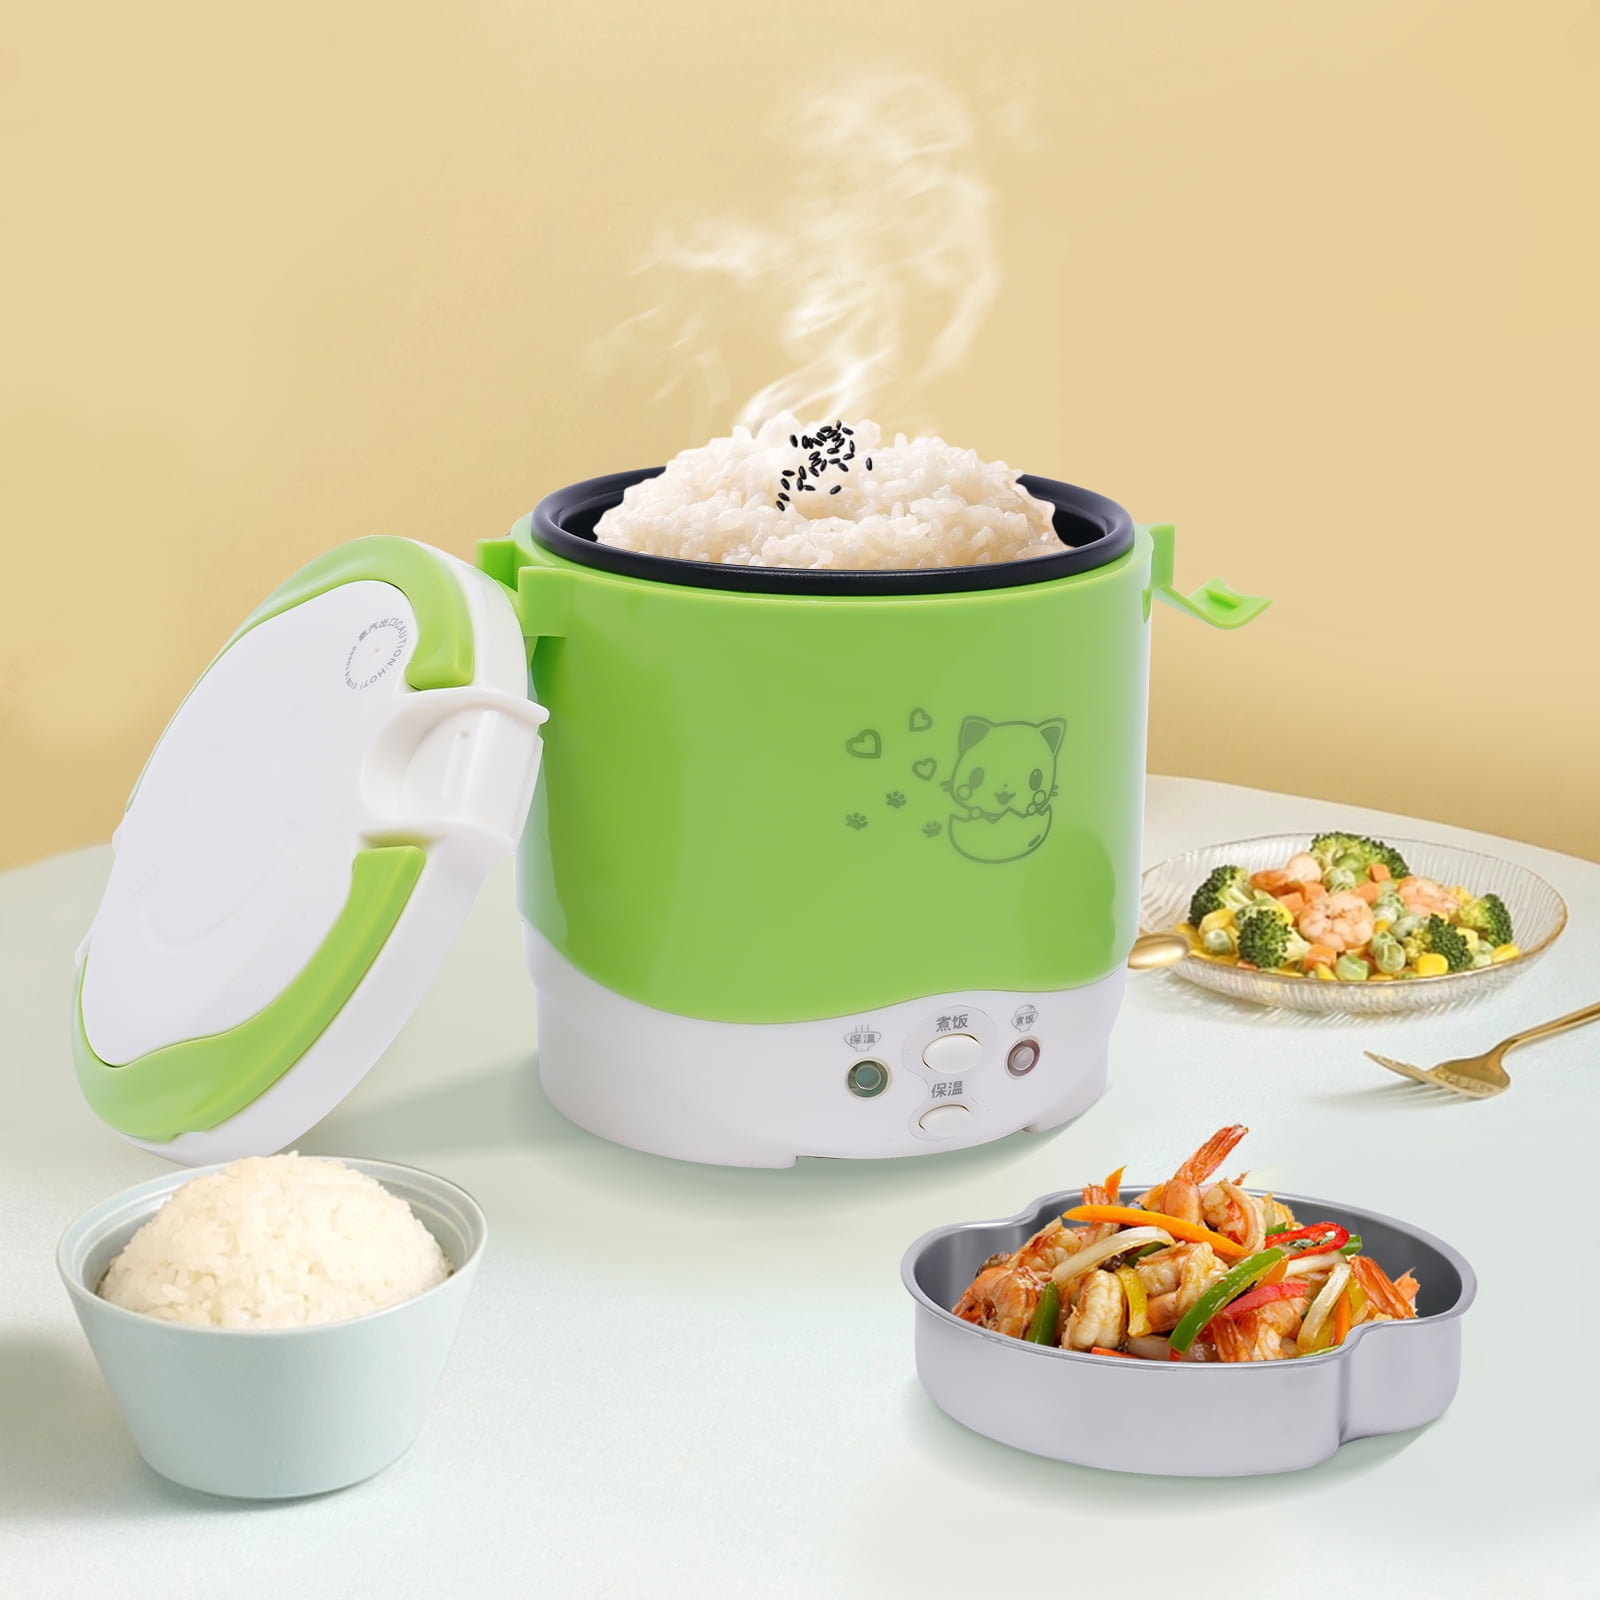 5 Core Rice Cooker Small Rice Maker Steamer Pot Electric Steamer Digital  Electric Rice Pot Multi Cooker & Food Steamer Warmer 5.3 Qt RC0501 